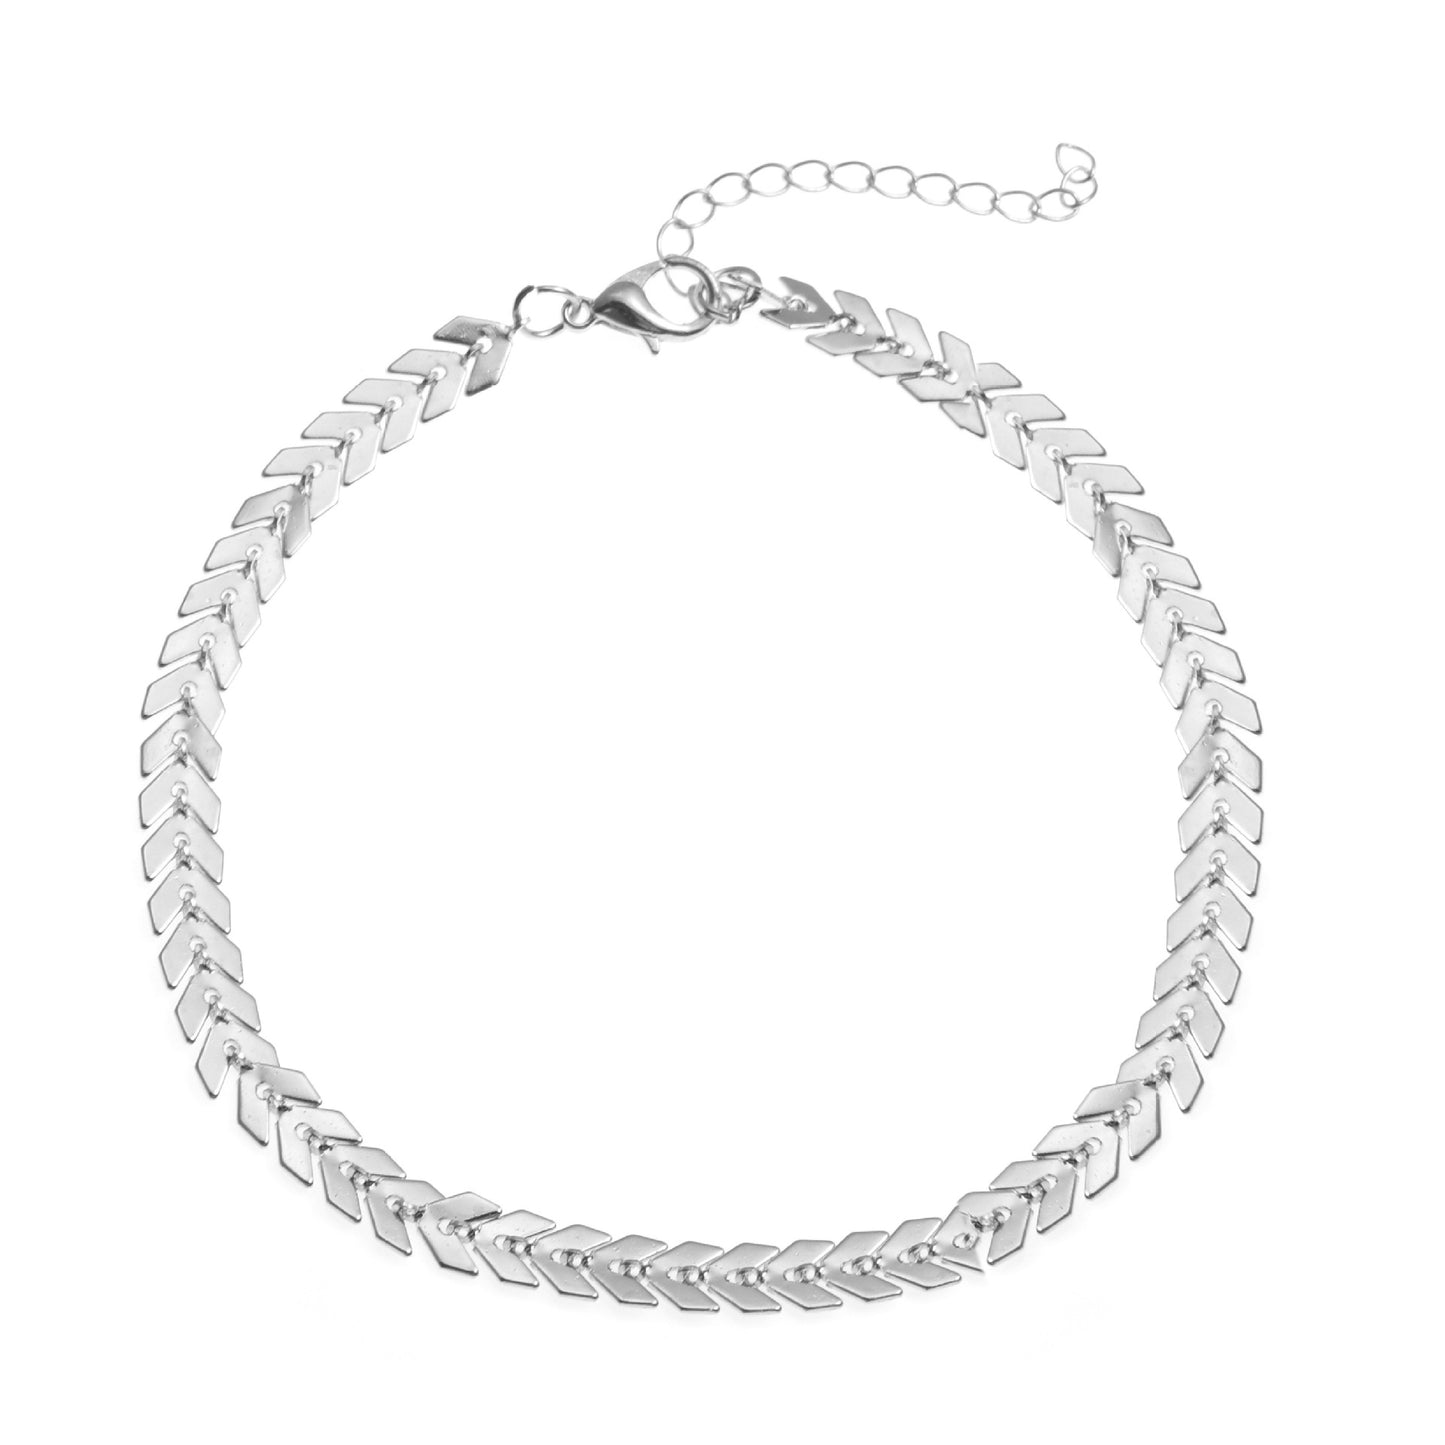 New European And American Bohemian Alloy Anklet